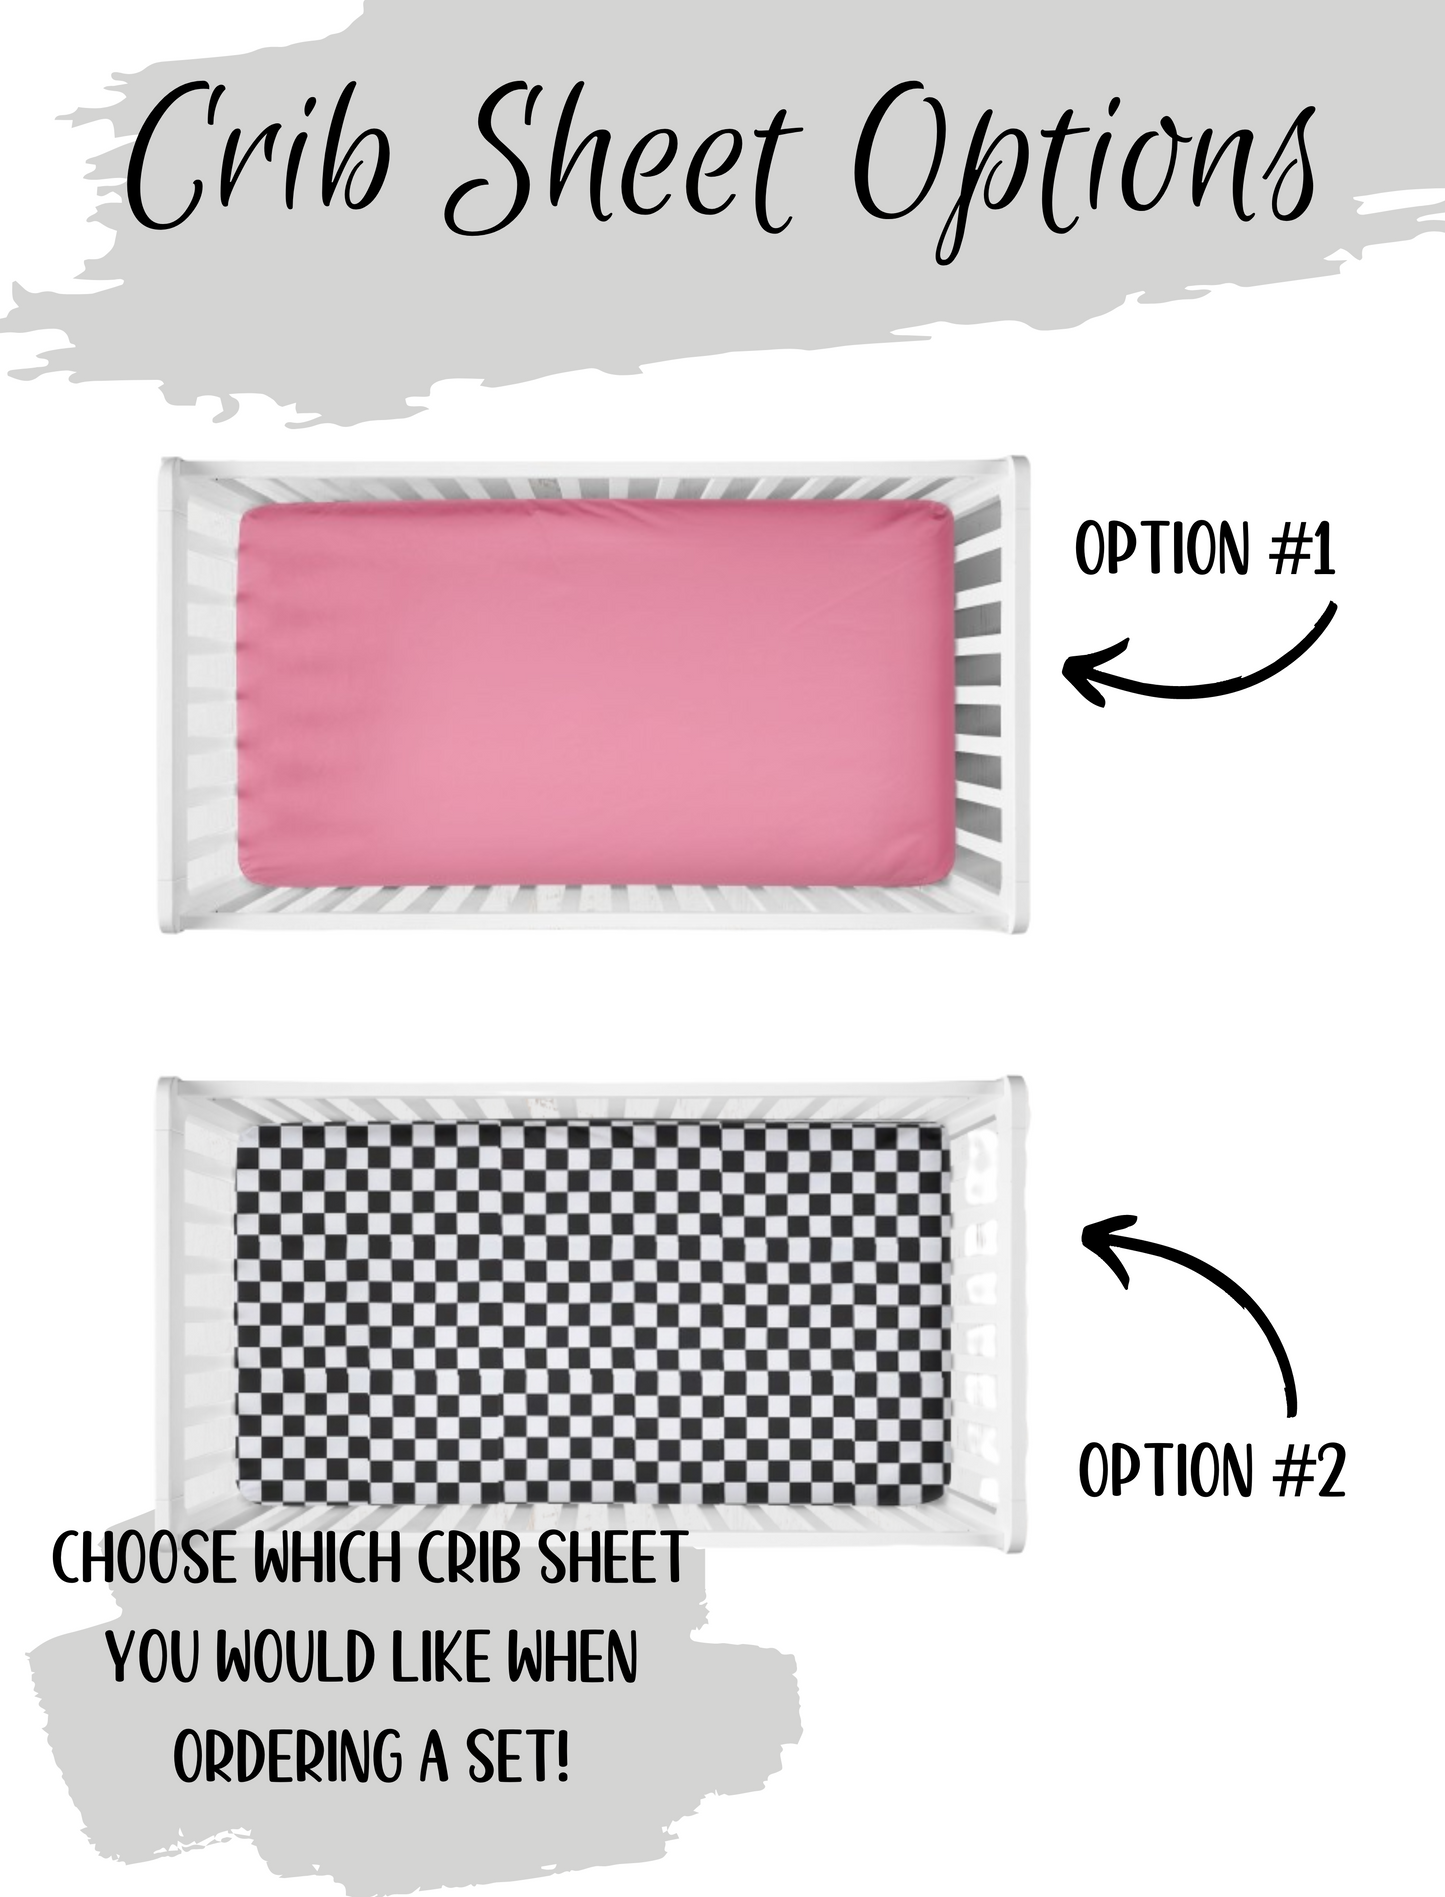 you pick your crib sheet - racing check or hot pink